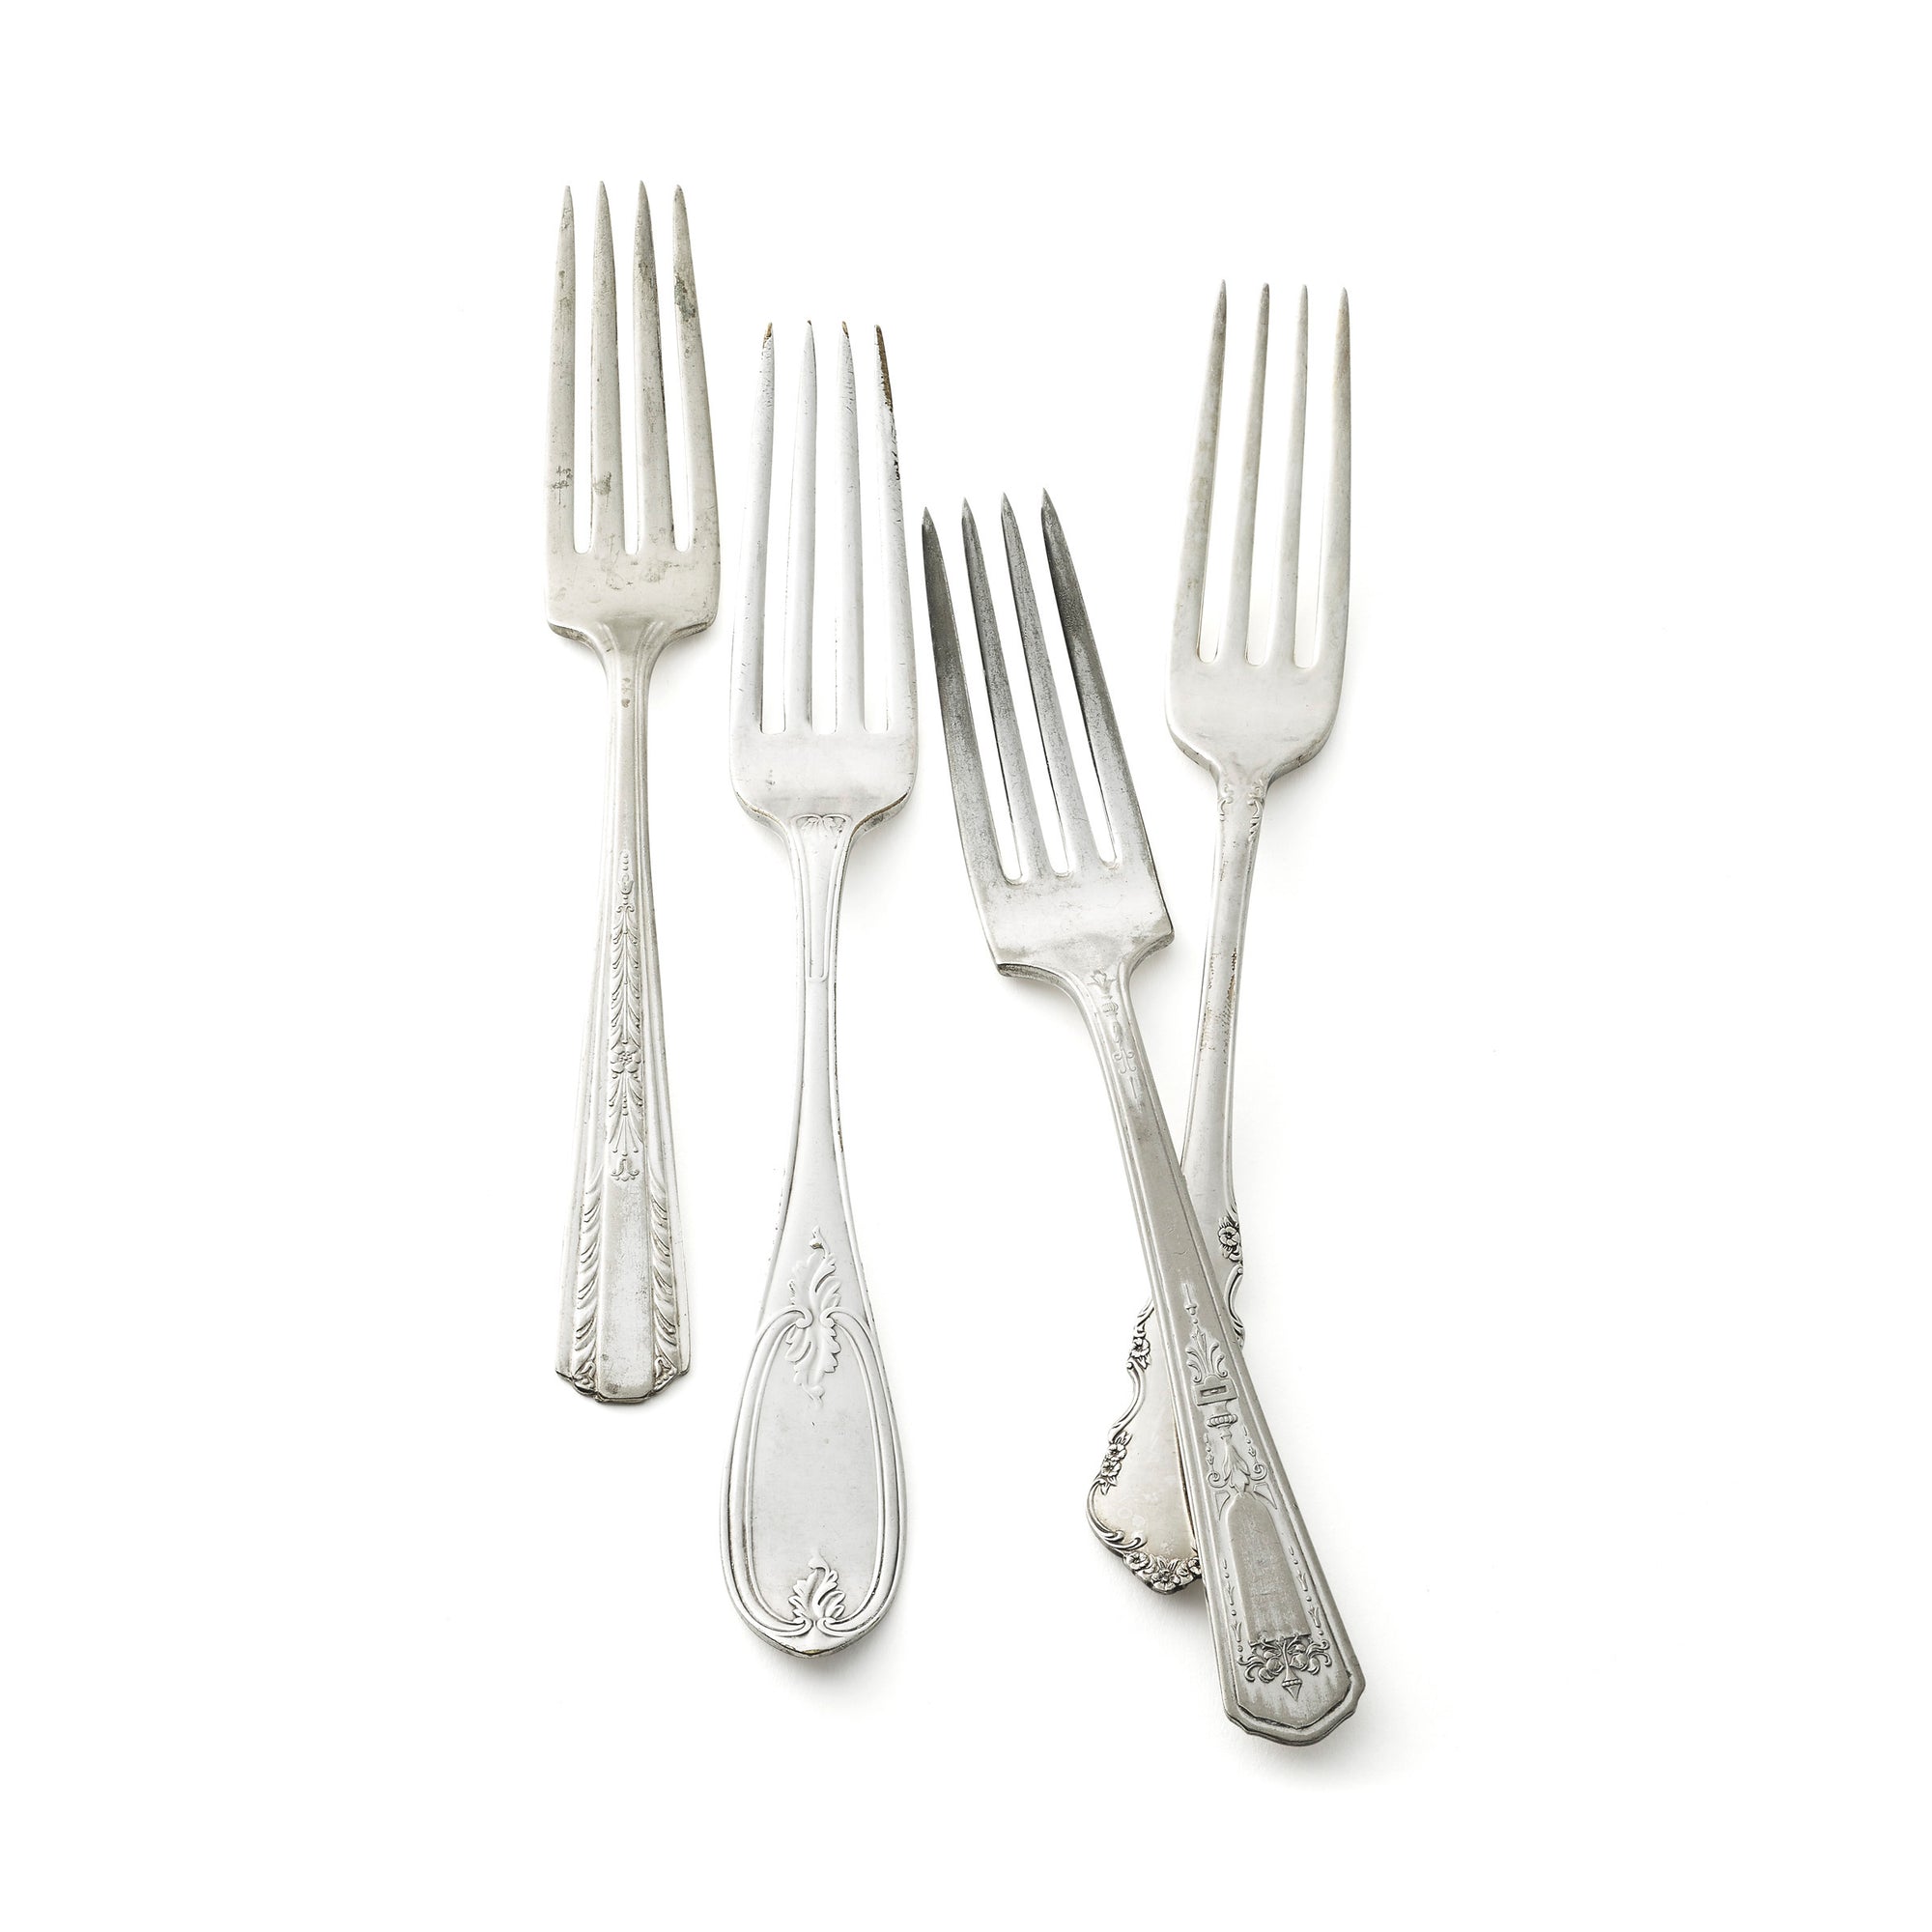 Vintage, silver-plated dinner forks collected by Caskata.